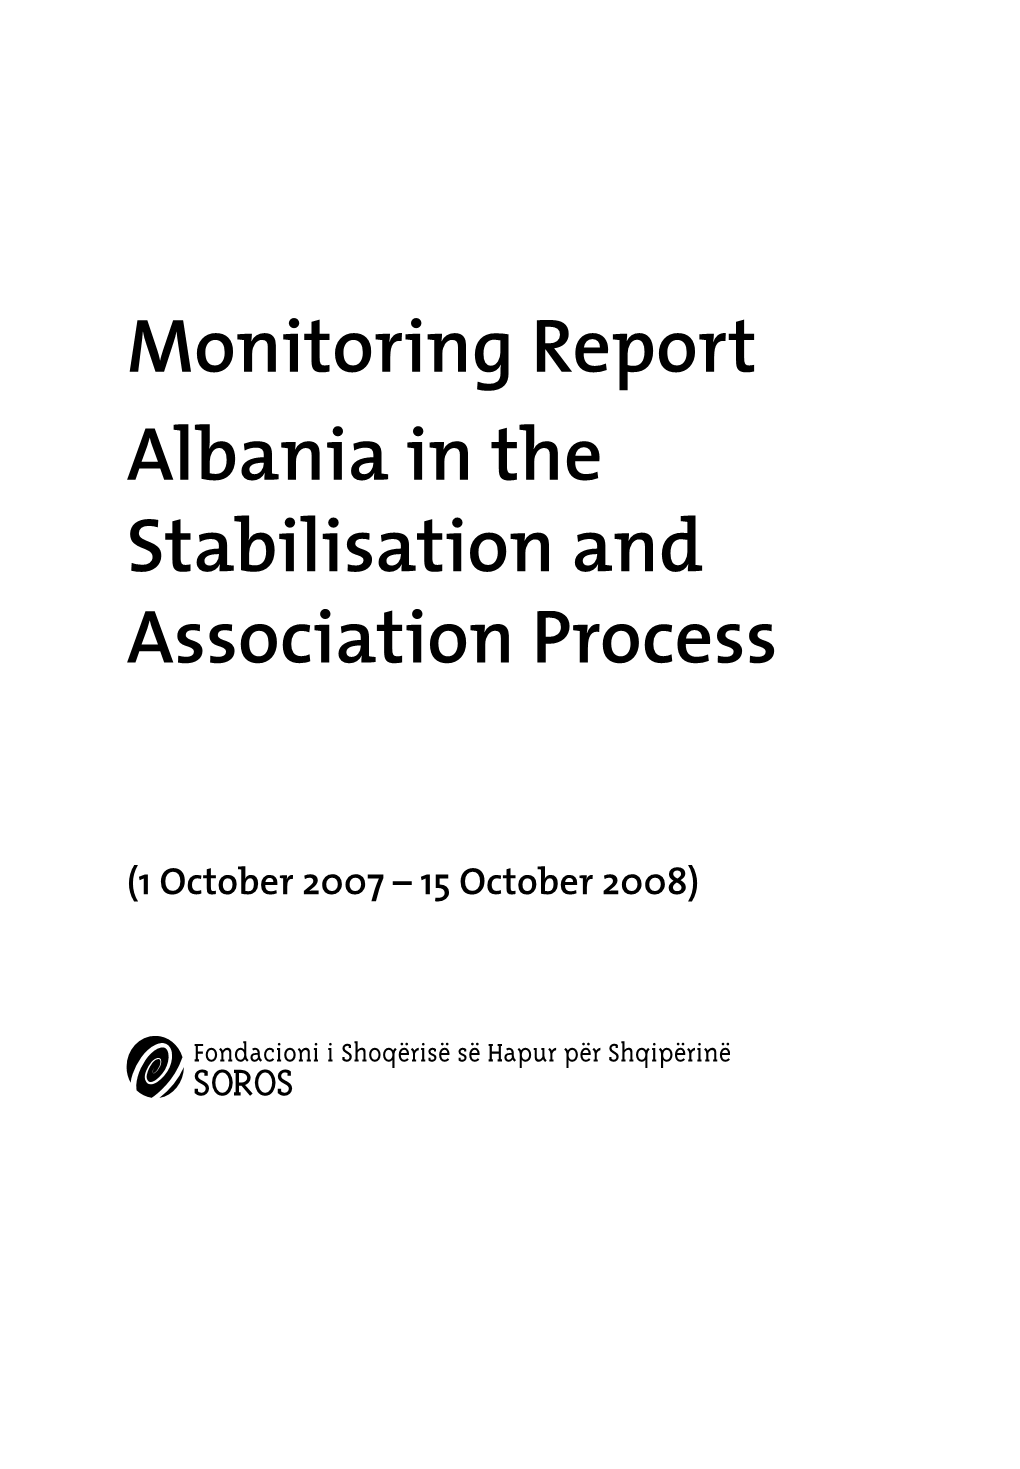 Monitoring Report Albania in the Stabilisation and Association Process